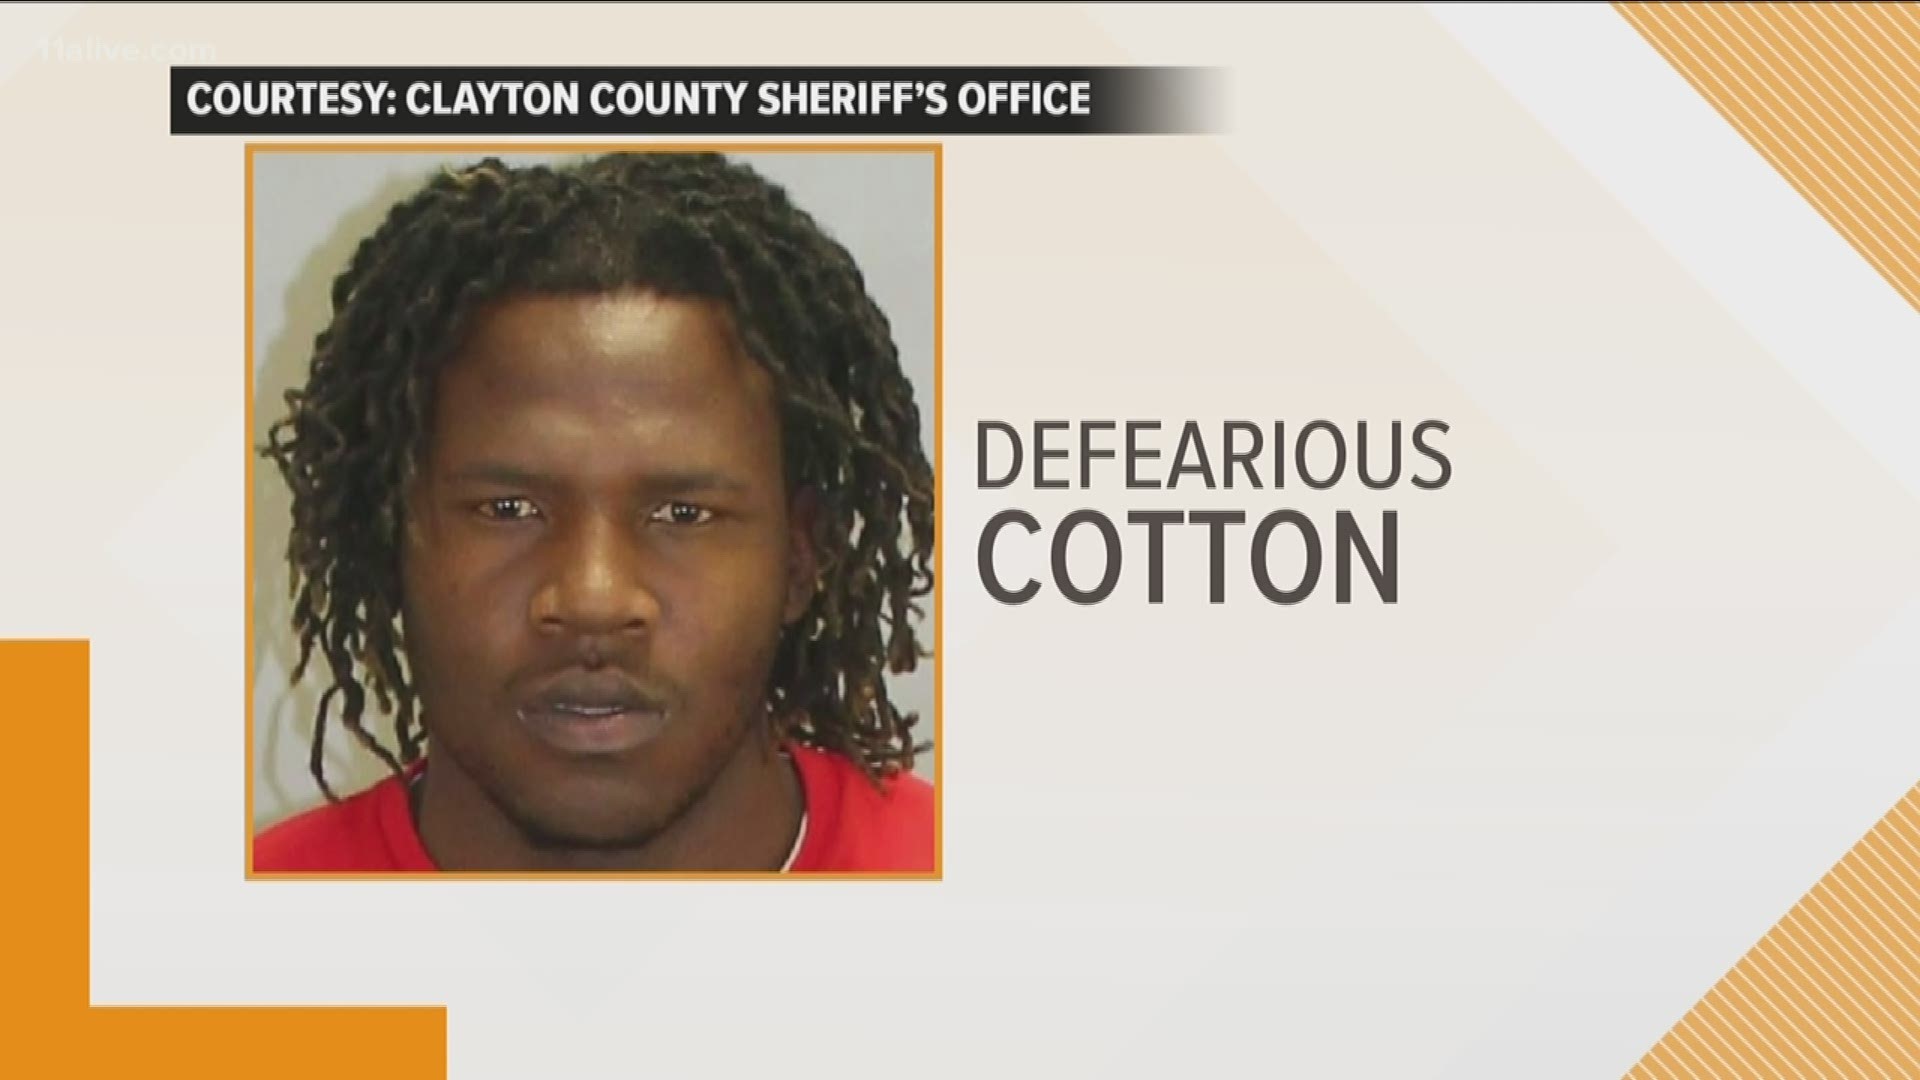 Back in July of 2017, Defearious Cotton was arrested on misdemeanor marijuana and traffic charges. Cotton’s was in possession of a handgun and the weapon was confiscated, according to deputies.